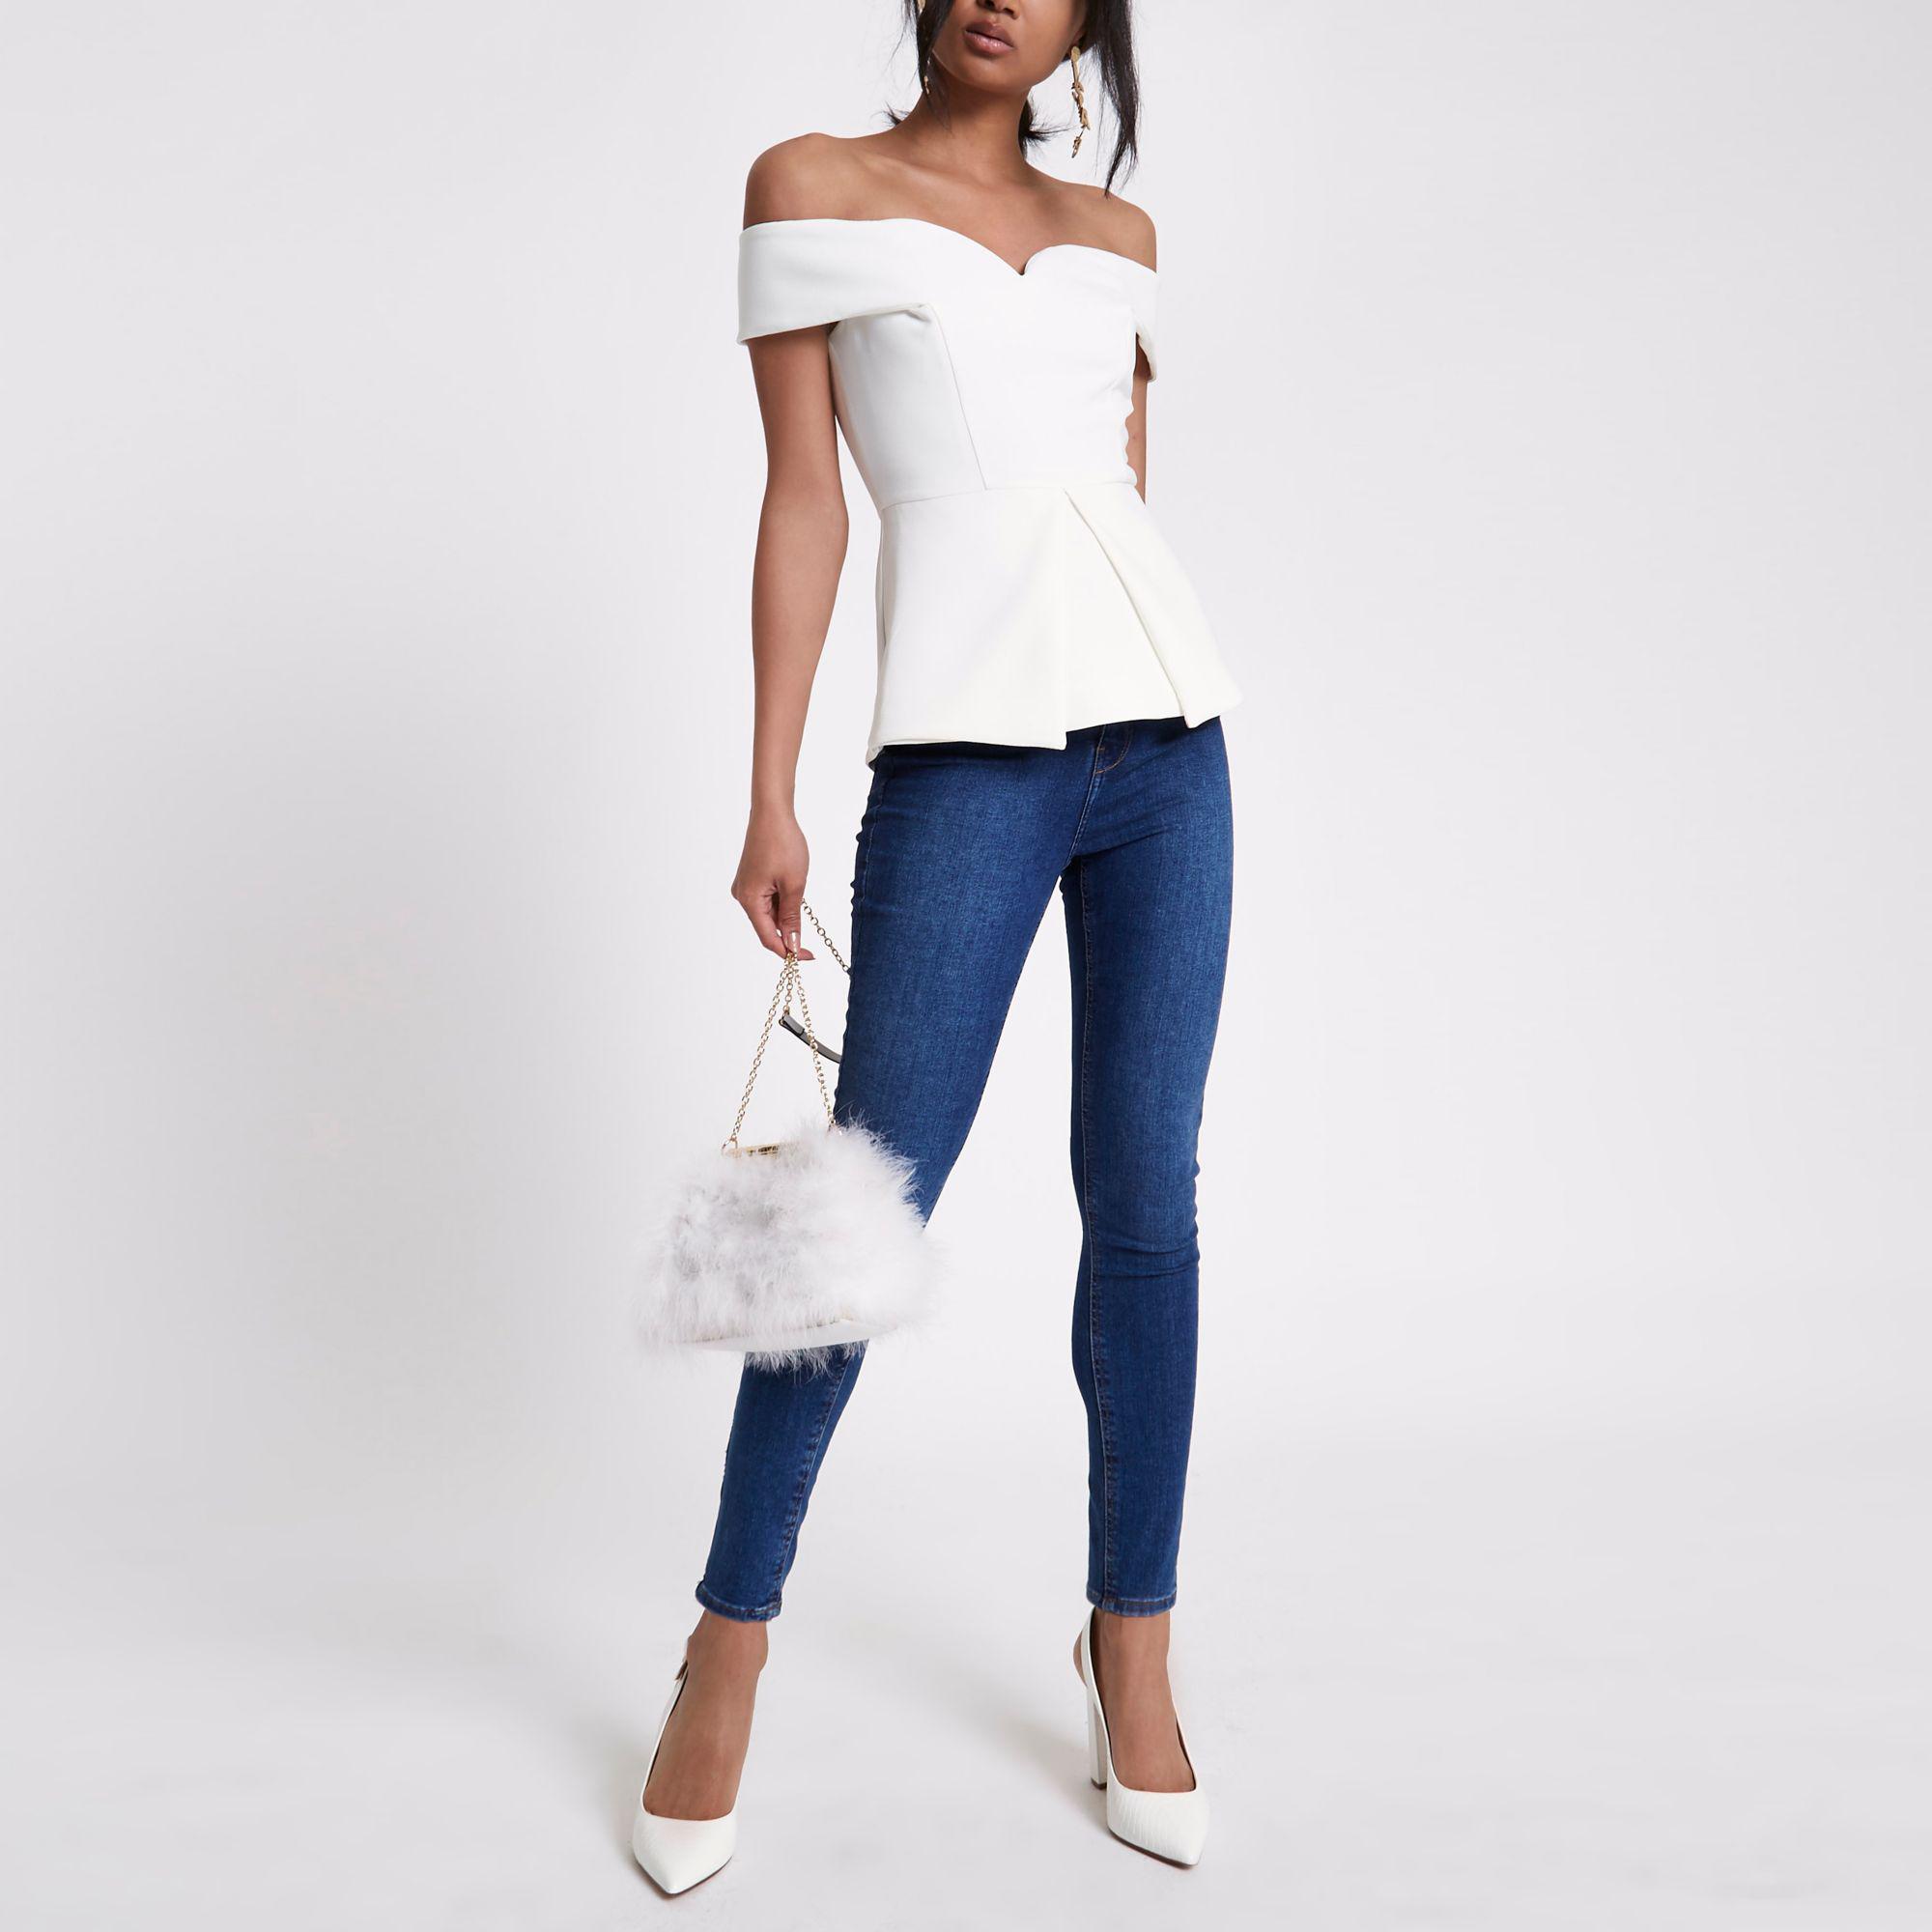 River Island White Structured Bardot Top | Lyst Canada